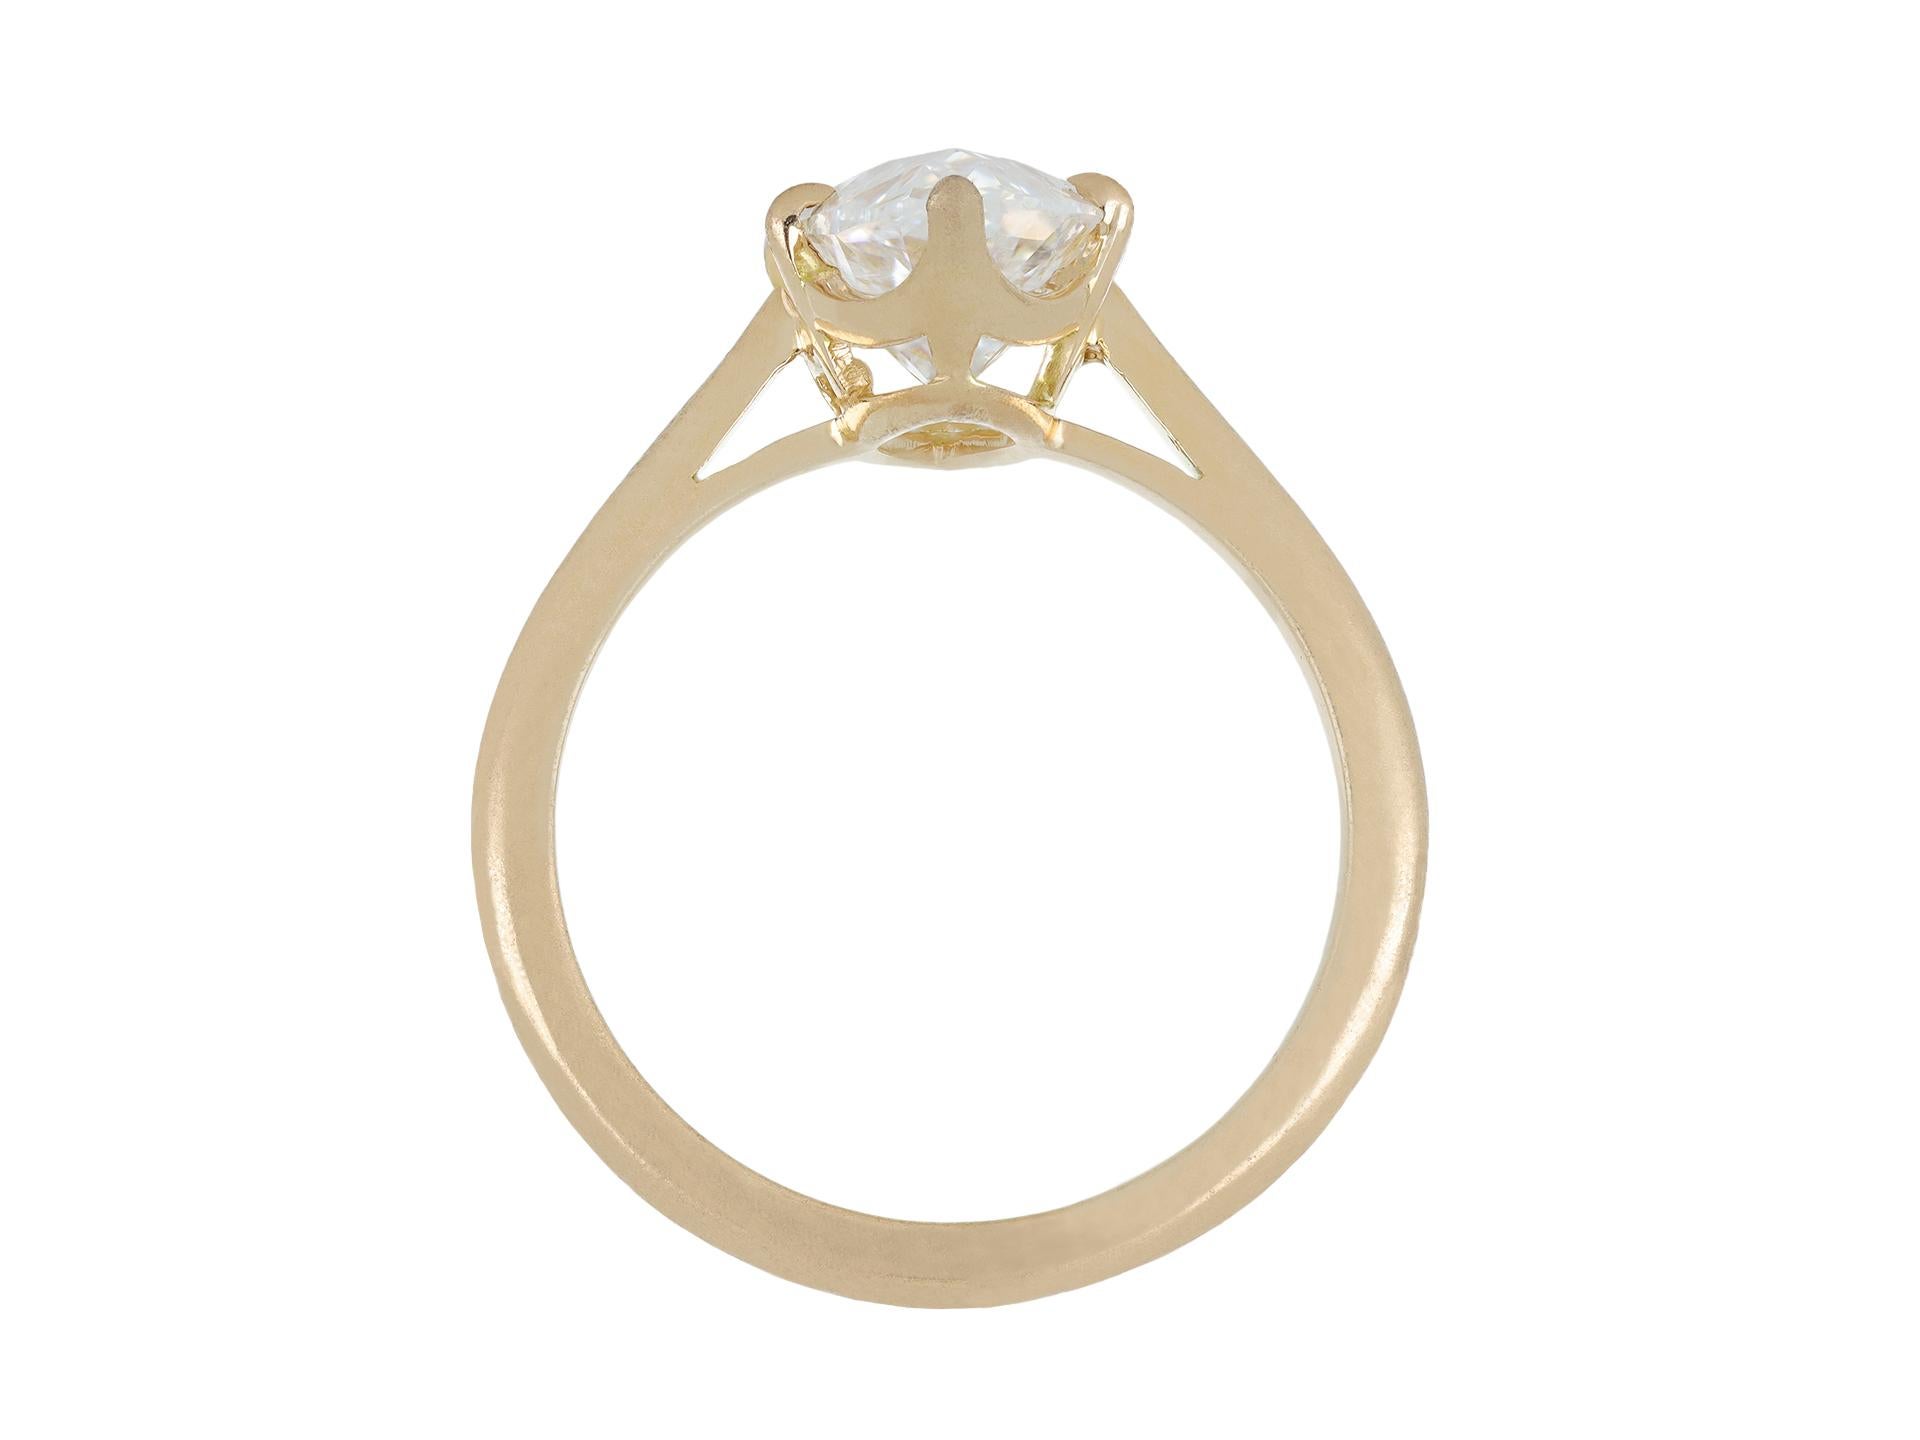 Type IIa marquise shape diamond solitaire ring. Set to centre with a Golconda type IIa marquise shape old cut diamond, D colour, I1 clarity, with a weight of 3.17 carats, in an open back claw setting, to an elegant solitaire design featuring curving